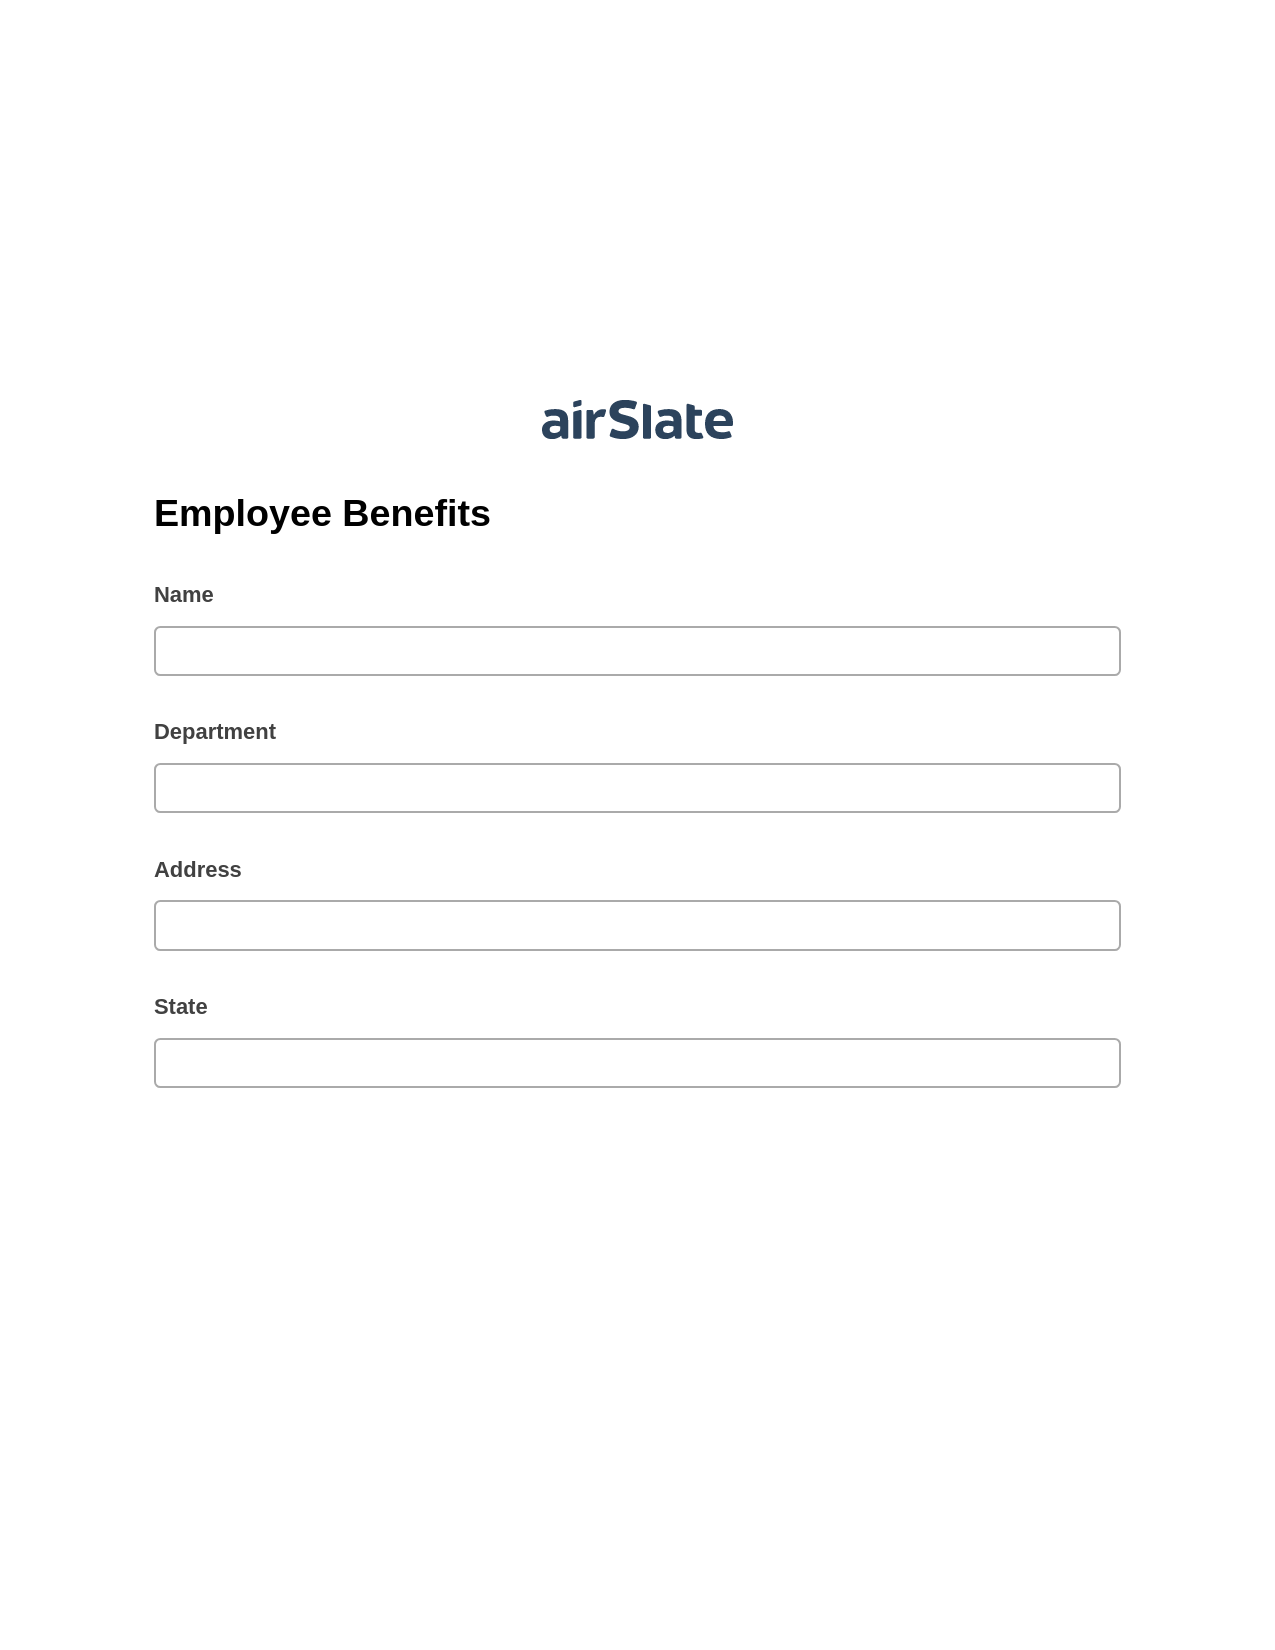 Employee Benefits Pre-fill from MySQL Bot, Audit Trail Bot, Export to Salesforce Bot